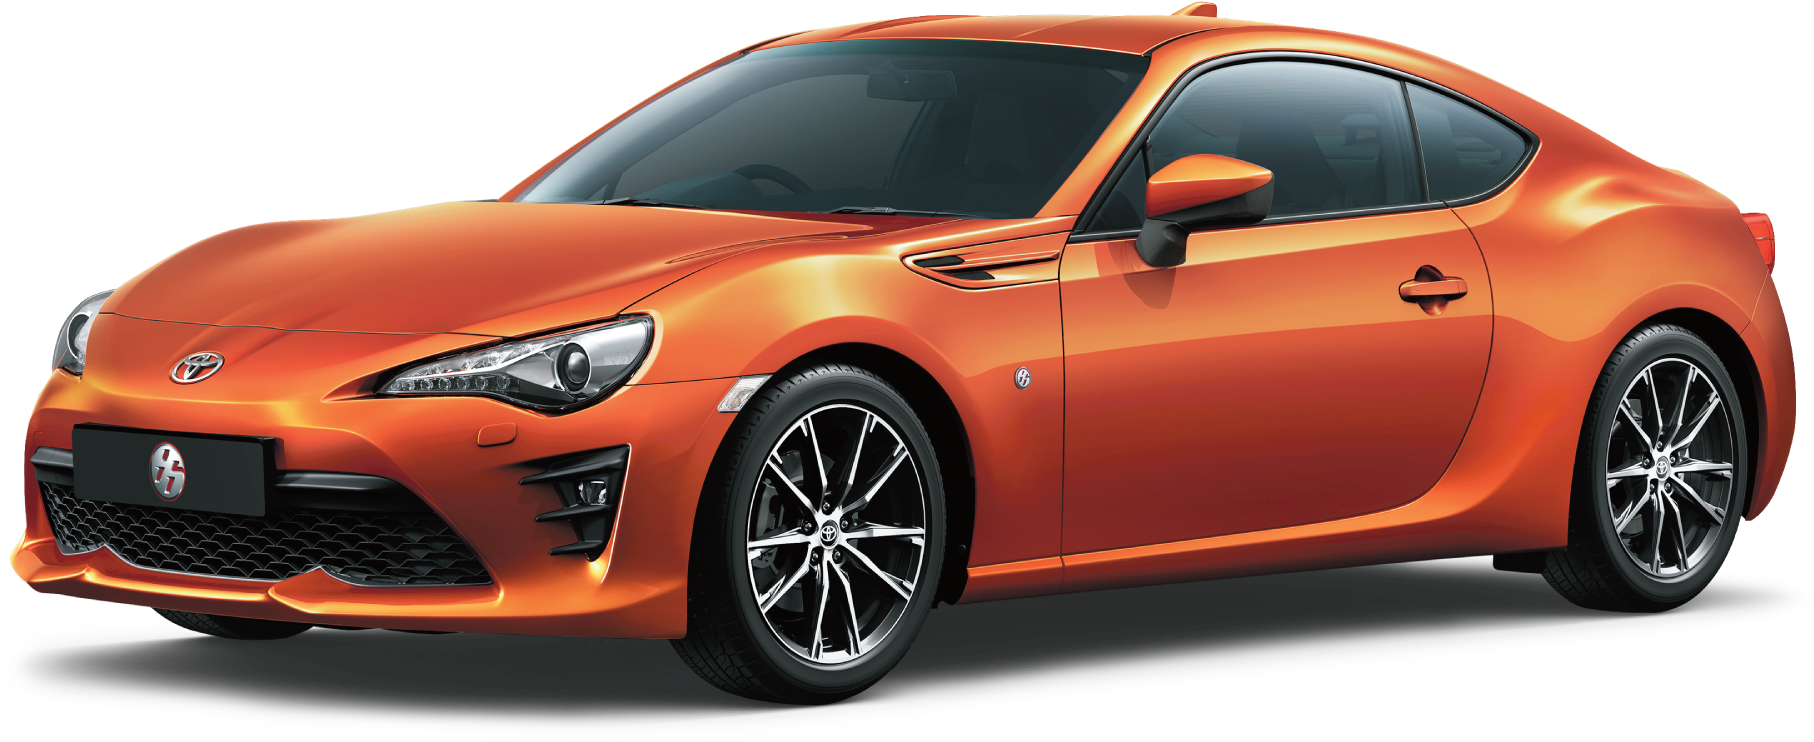 86 - Toyota Gt86 2017 Price Philippines (1916x1079), Png Download